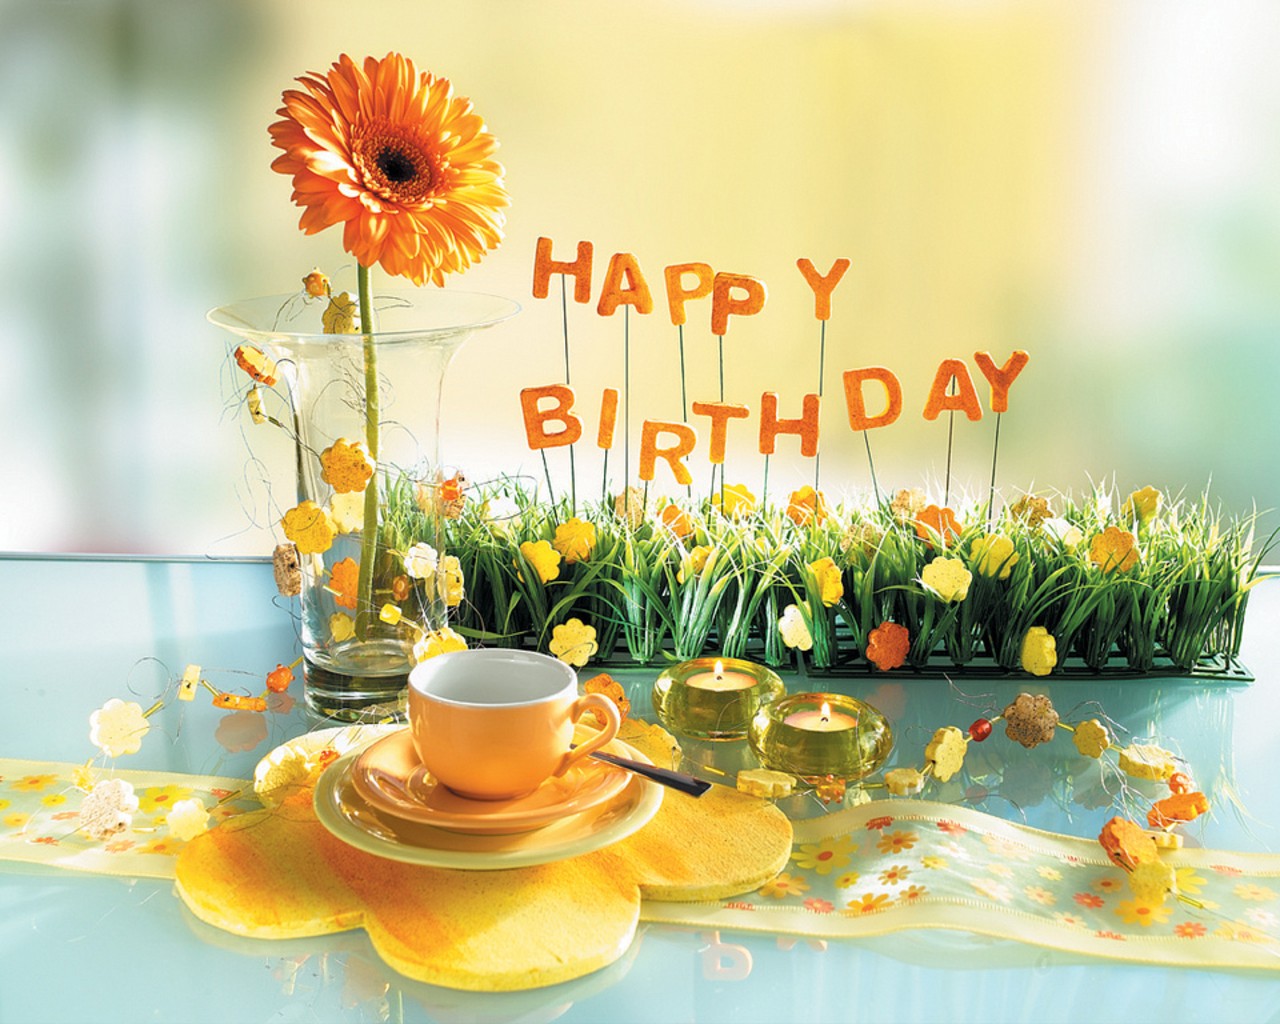 13 Happy Birthday HD Wallpapers Backgrounds HQ Wallpapers 1280x1024